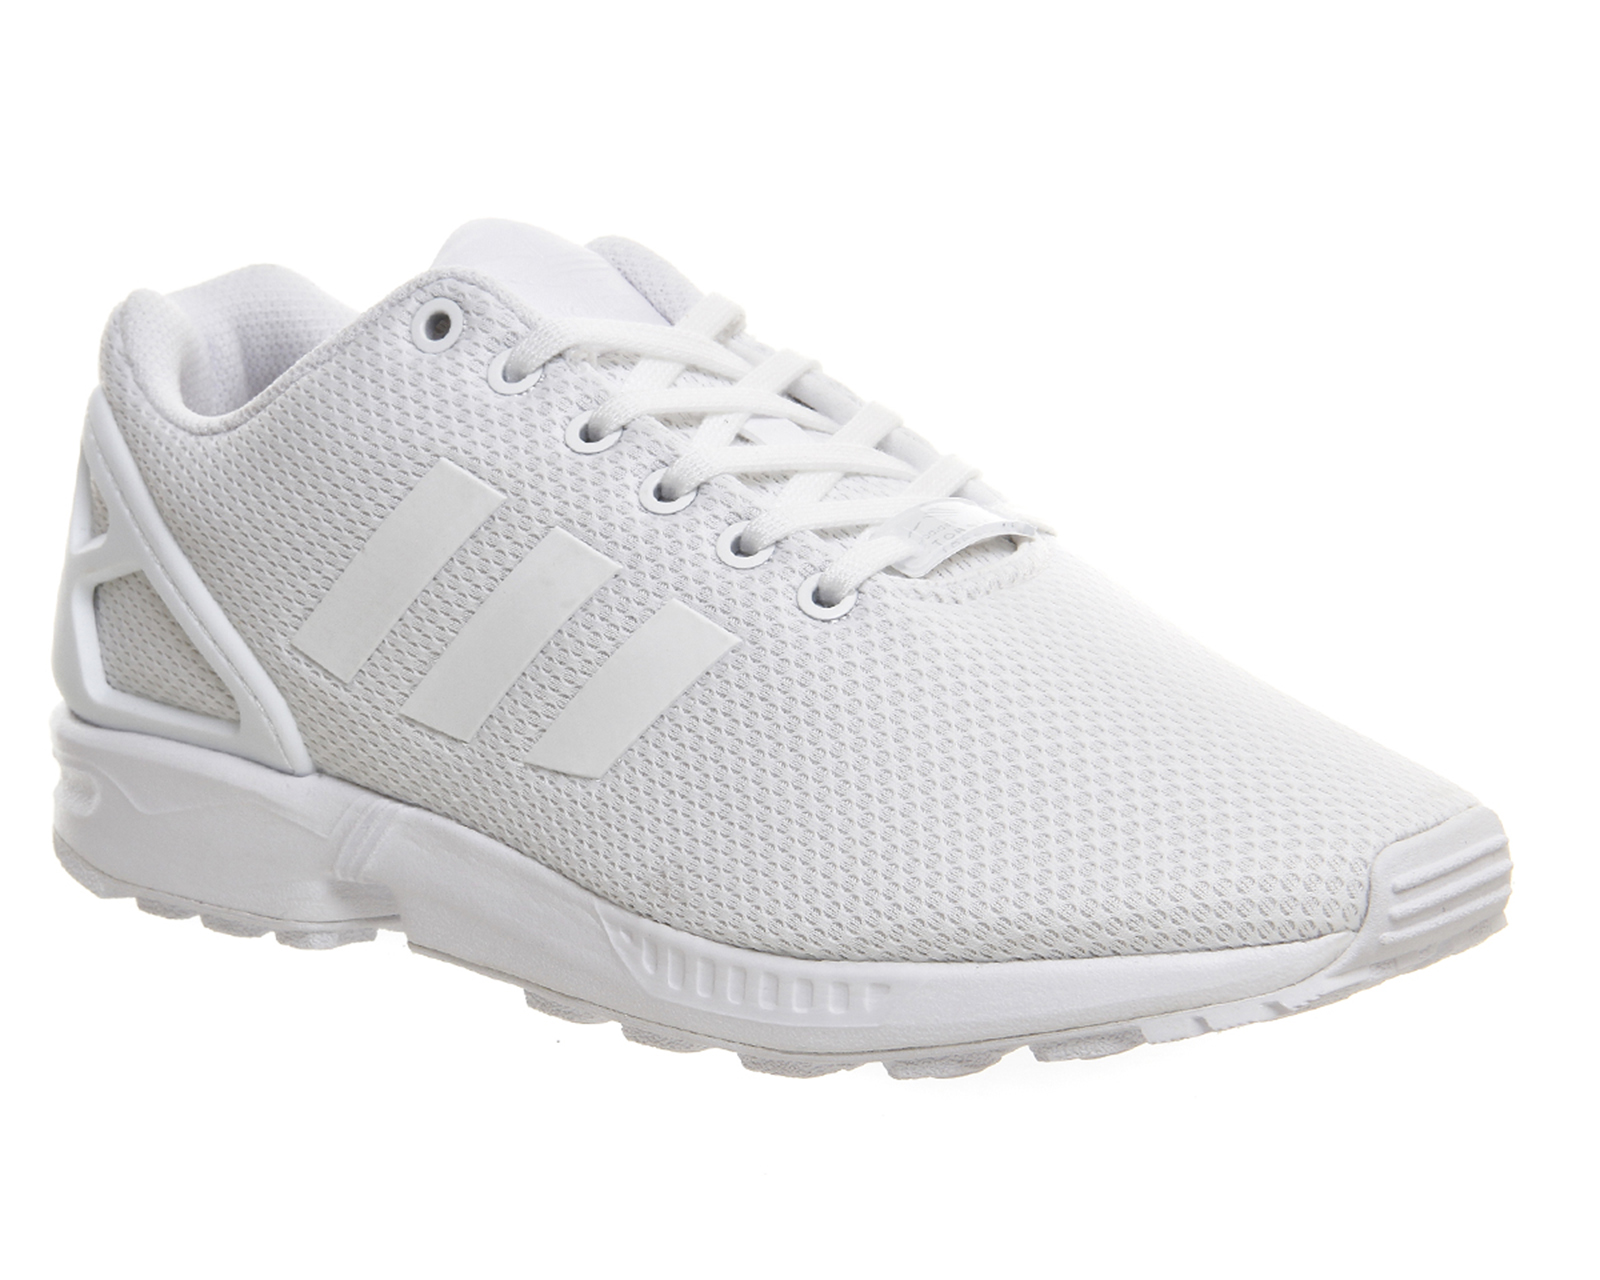 adidas zx flux triple white Online Shopping mall | Find the best prices and  places to buy -